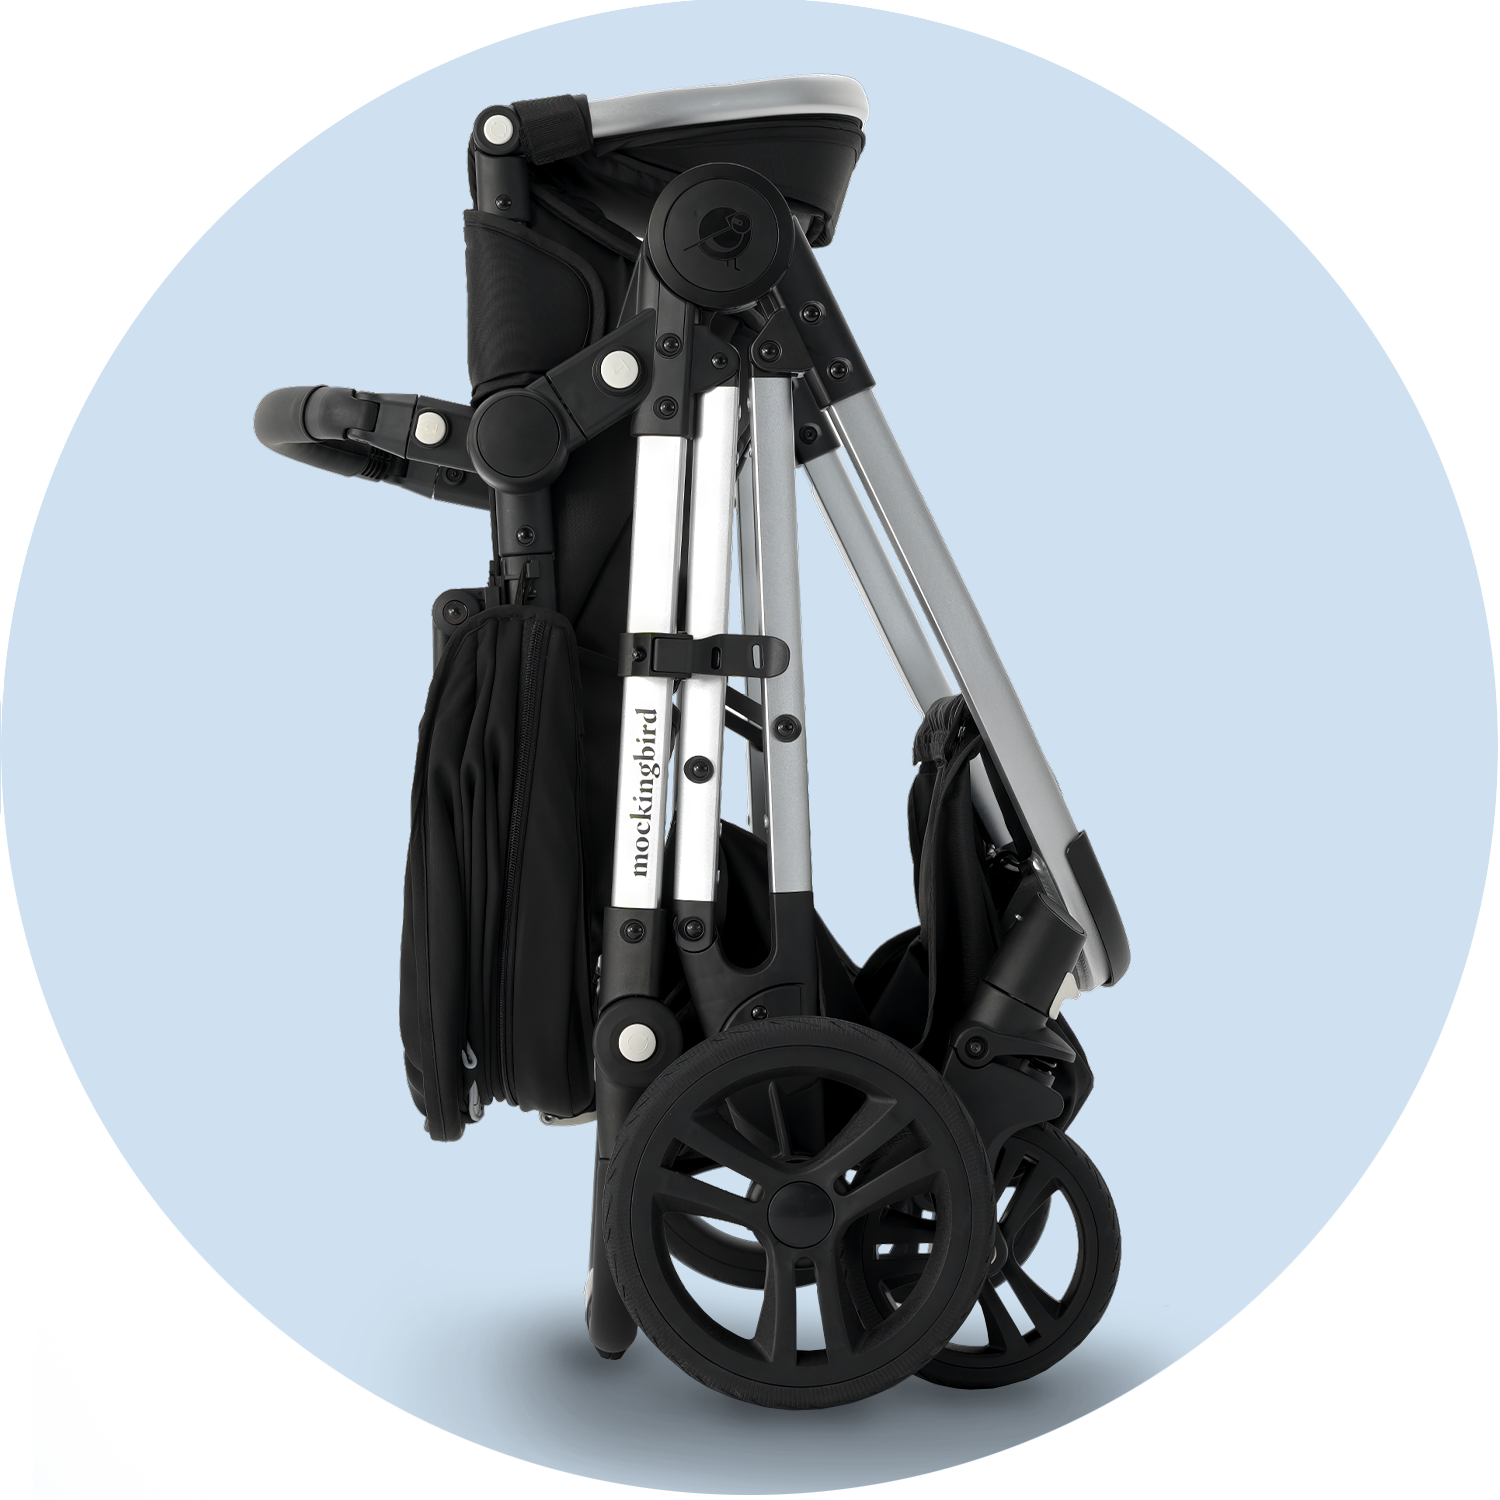 Black and silver collapsible baby stroller against a light blue background.